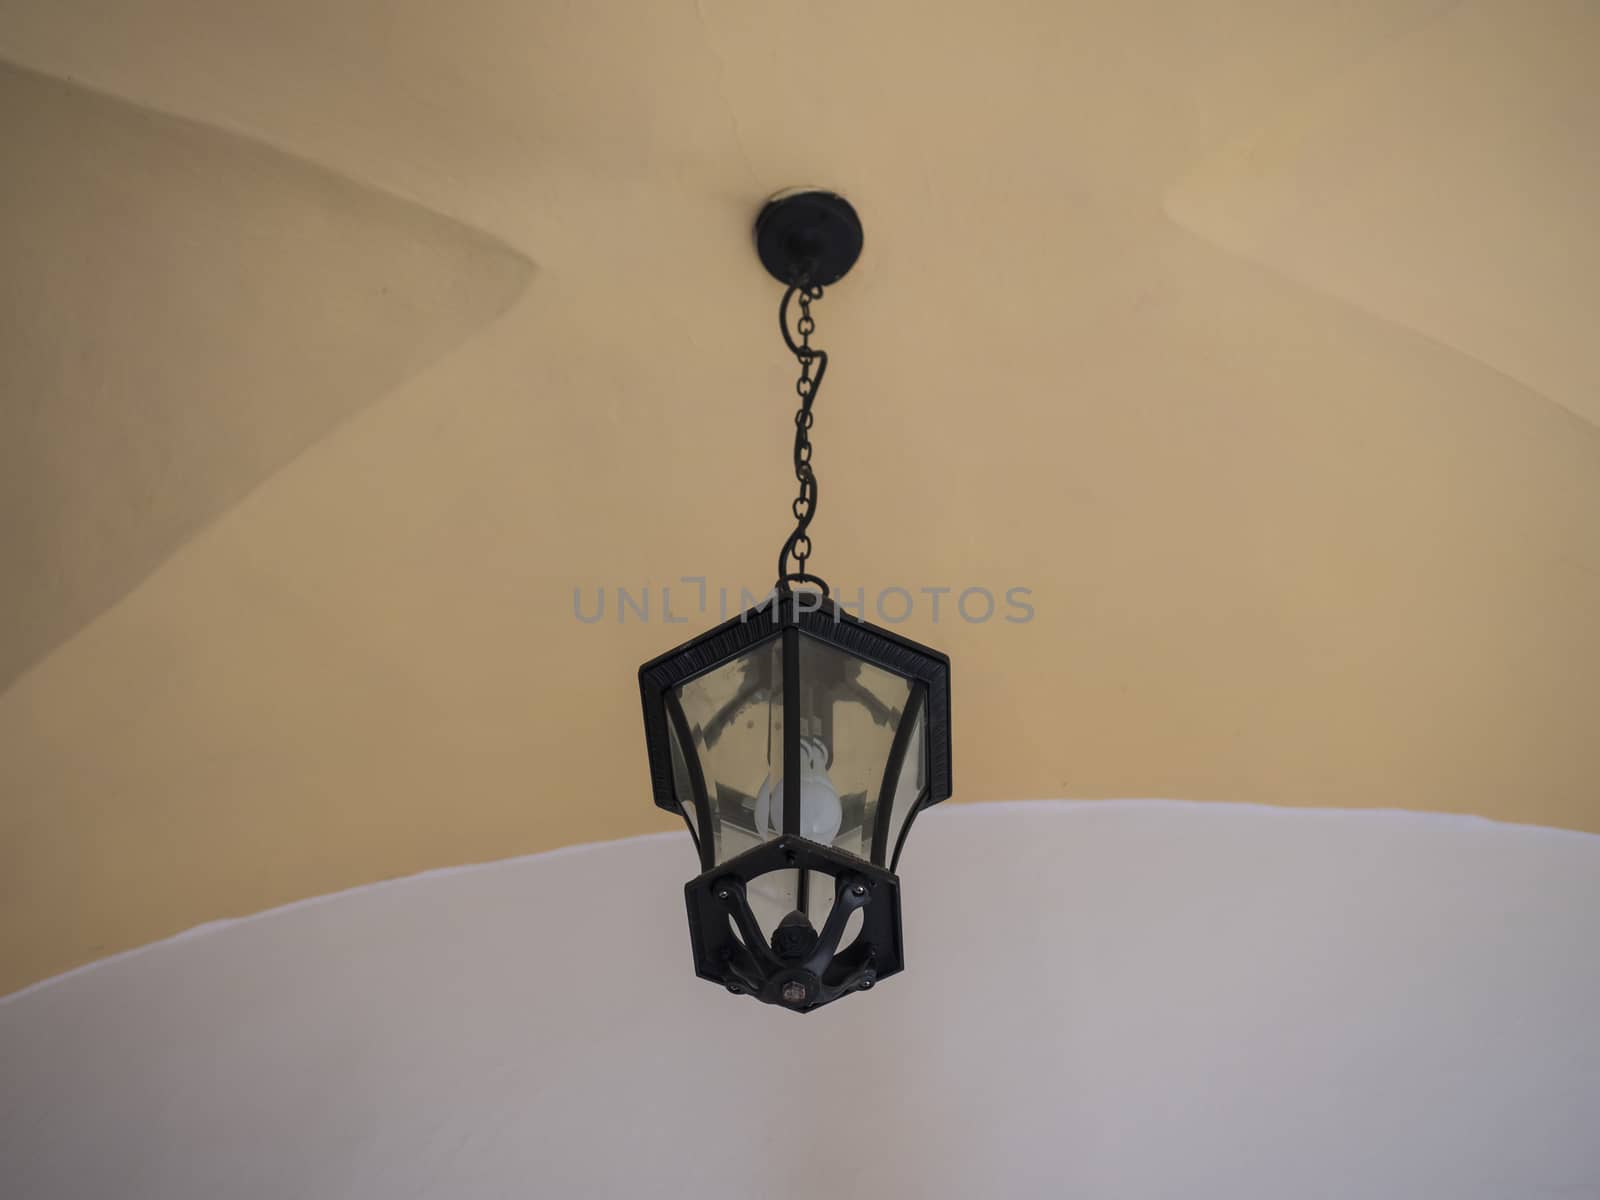 Electric black vintage lamp or lantern hanging on a chain under a vaulted yellow and white ceiling. Copy space.